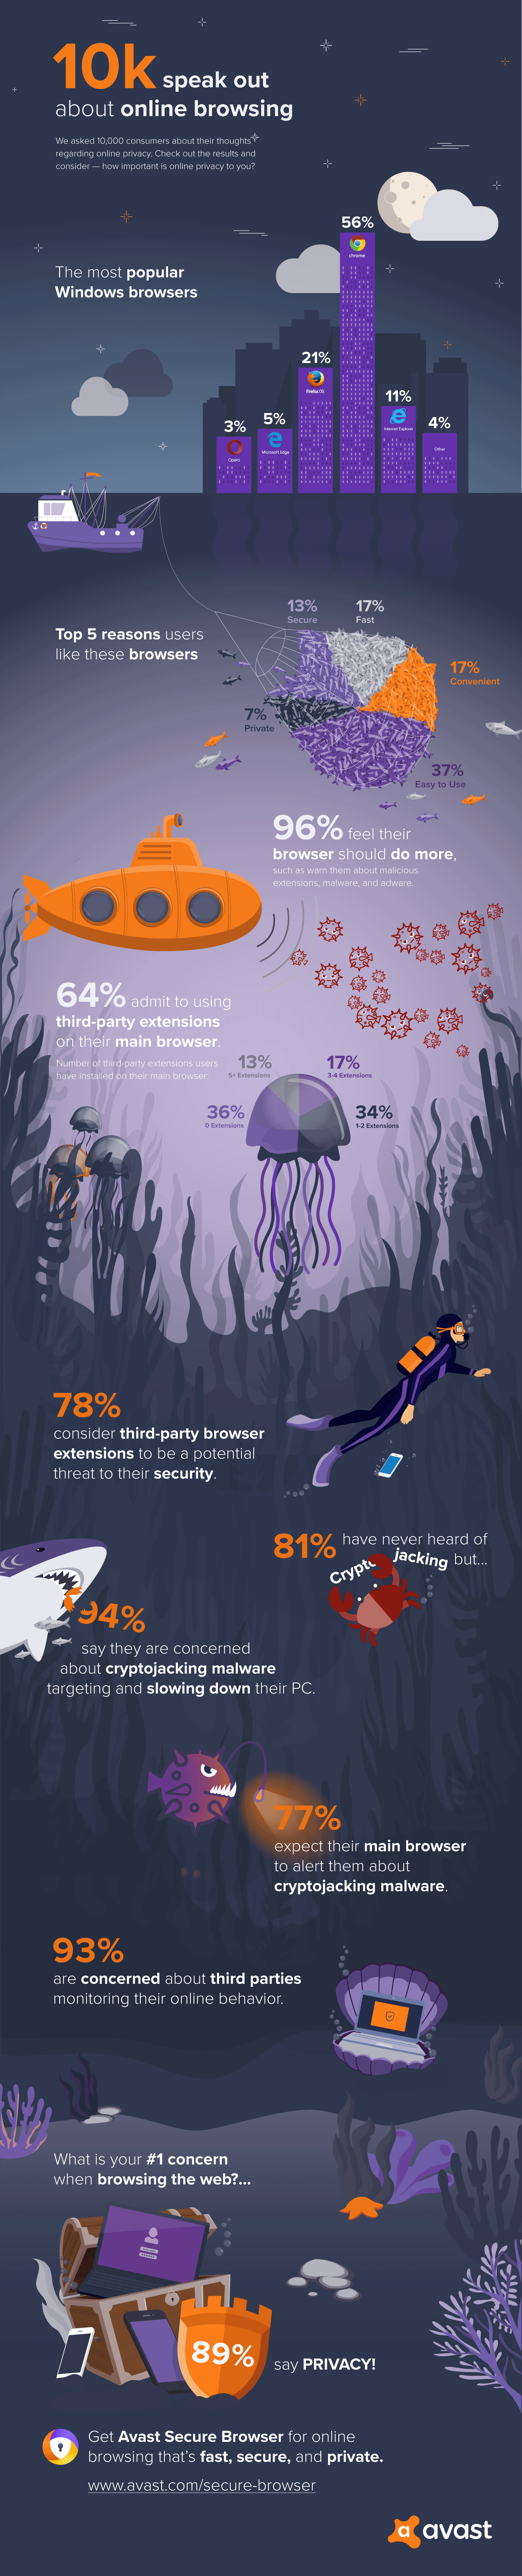 Avast_secure_browser_infographic_FINAL_it6